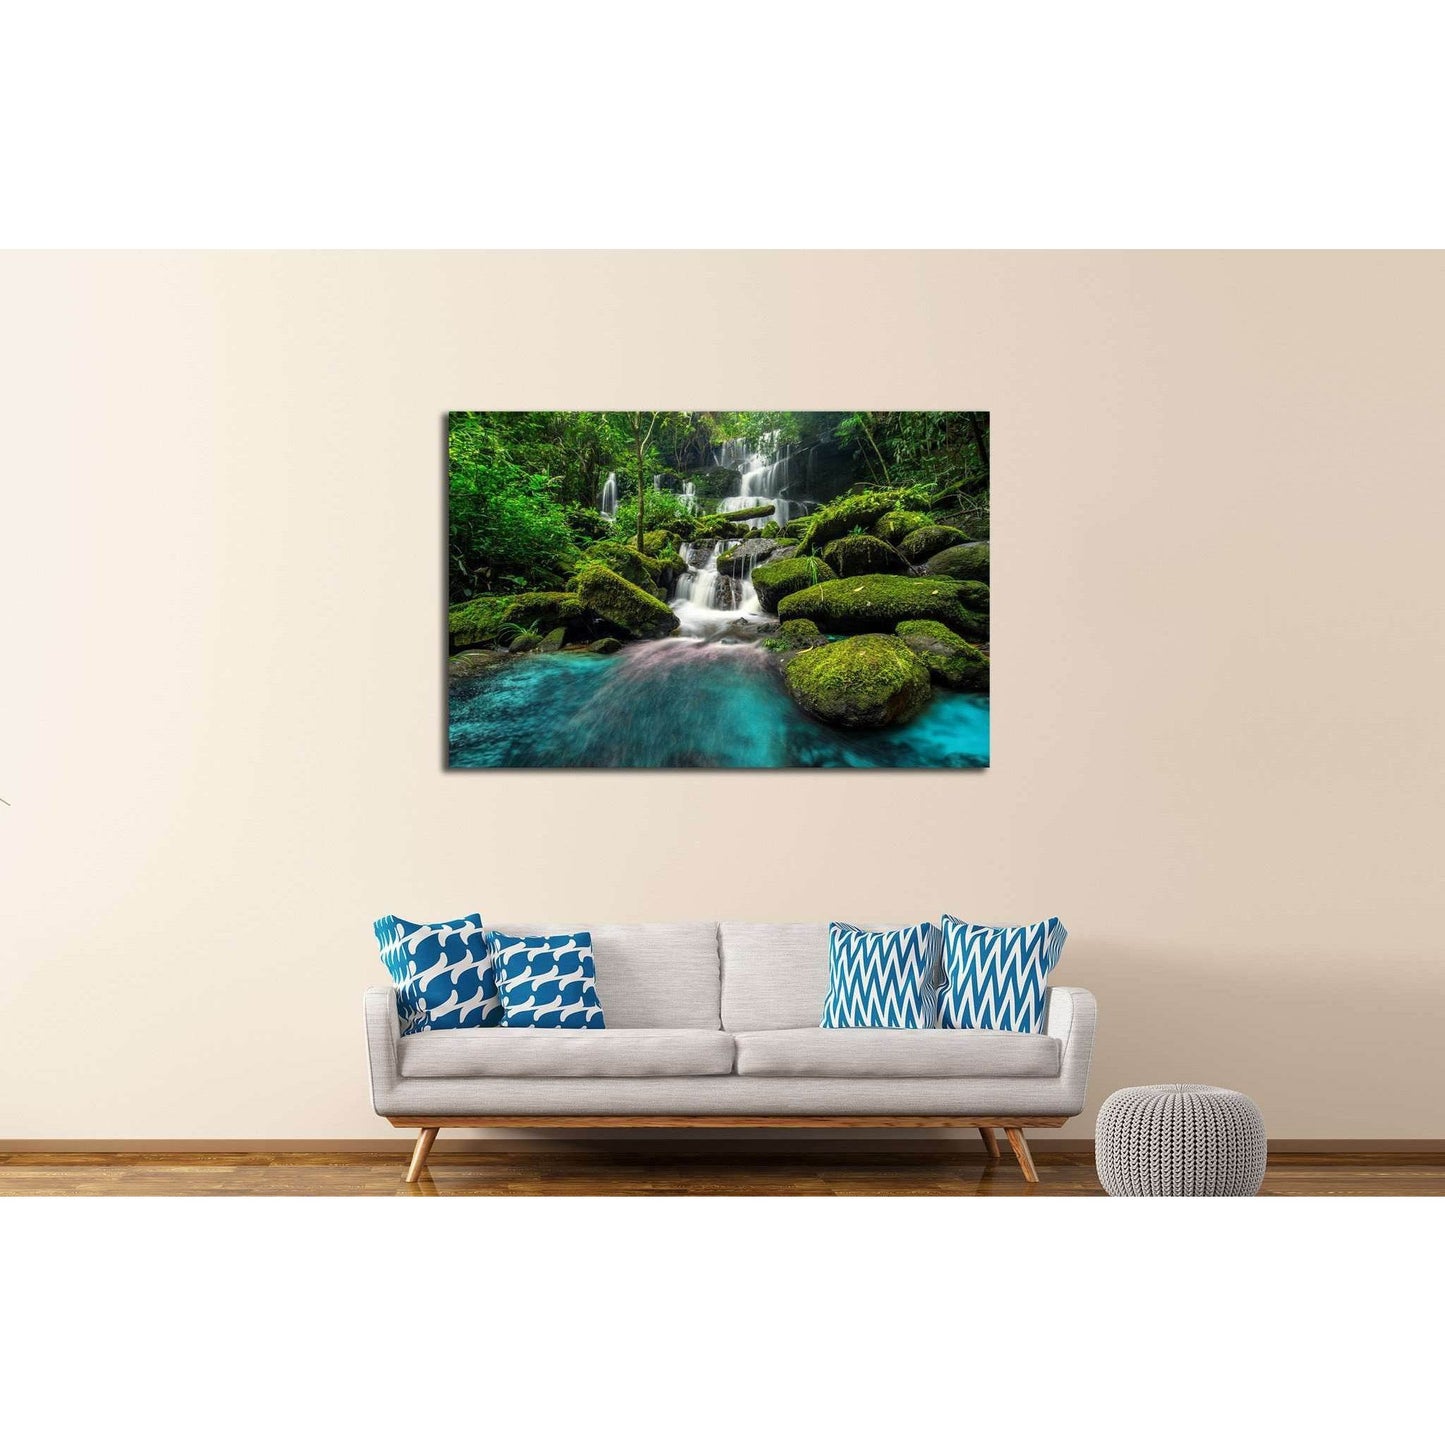 Thailand Forest Waterfall Canvas Art for Nature-Inspired SpacesThis canvas print showcases a verdant waterfall oasis, where the water flows over moss-covered rocks in a tranquil forest. The lush greenery and serene water create a refreshing and rejuvenati